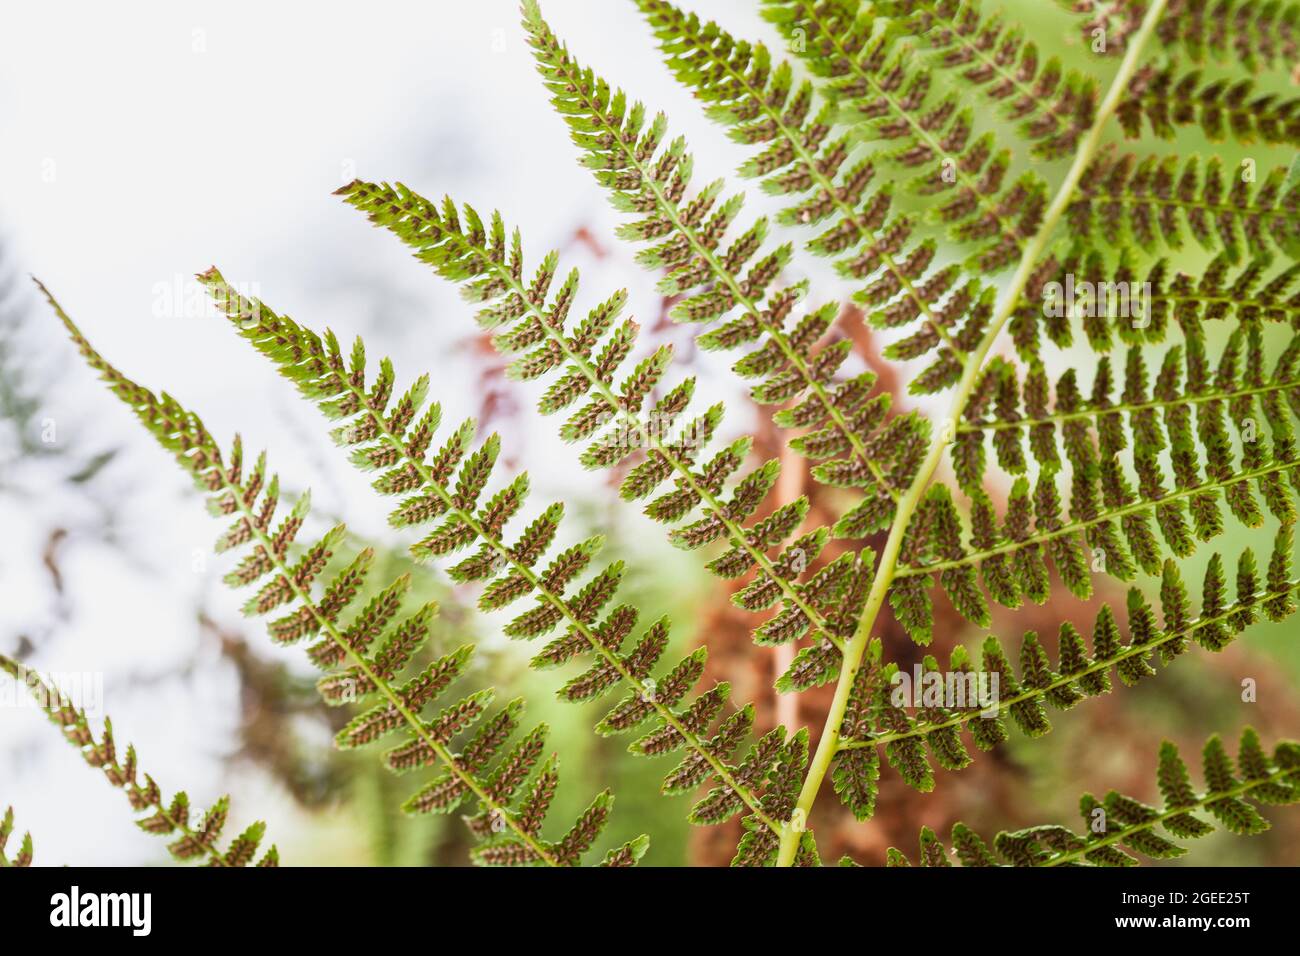 Fragment of autumnal fern leaf with clusters of sporangia, natural macro photo Stock Photo